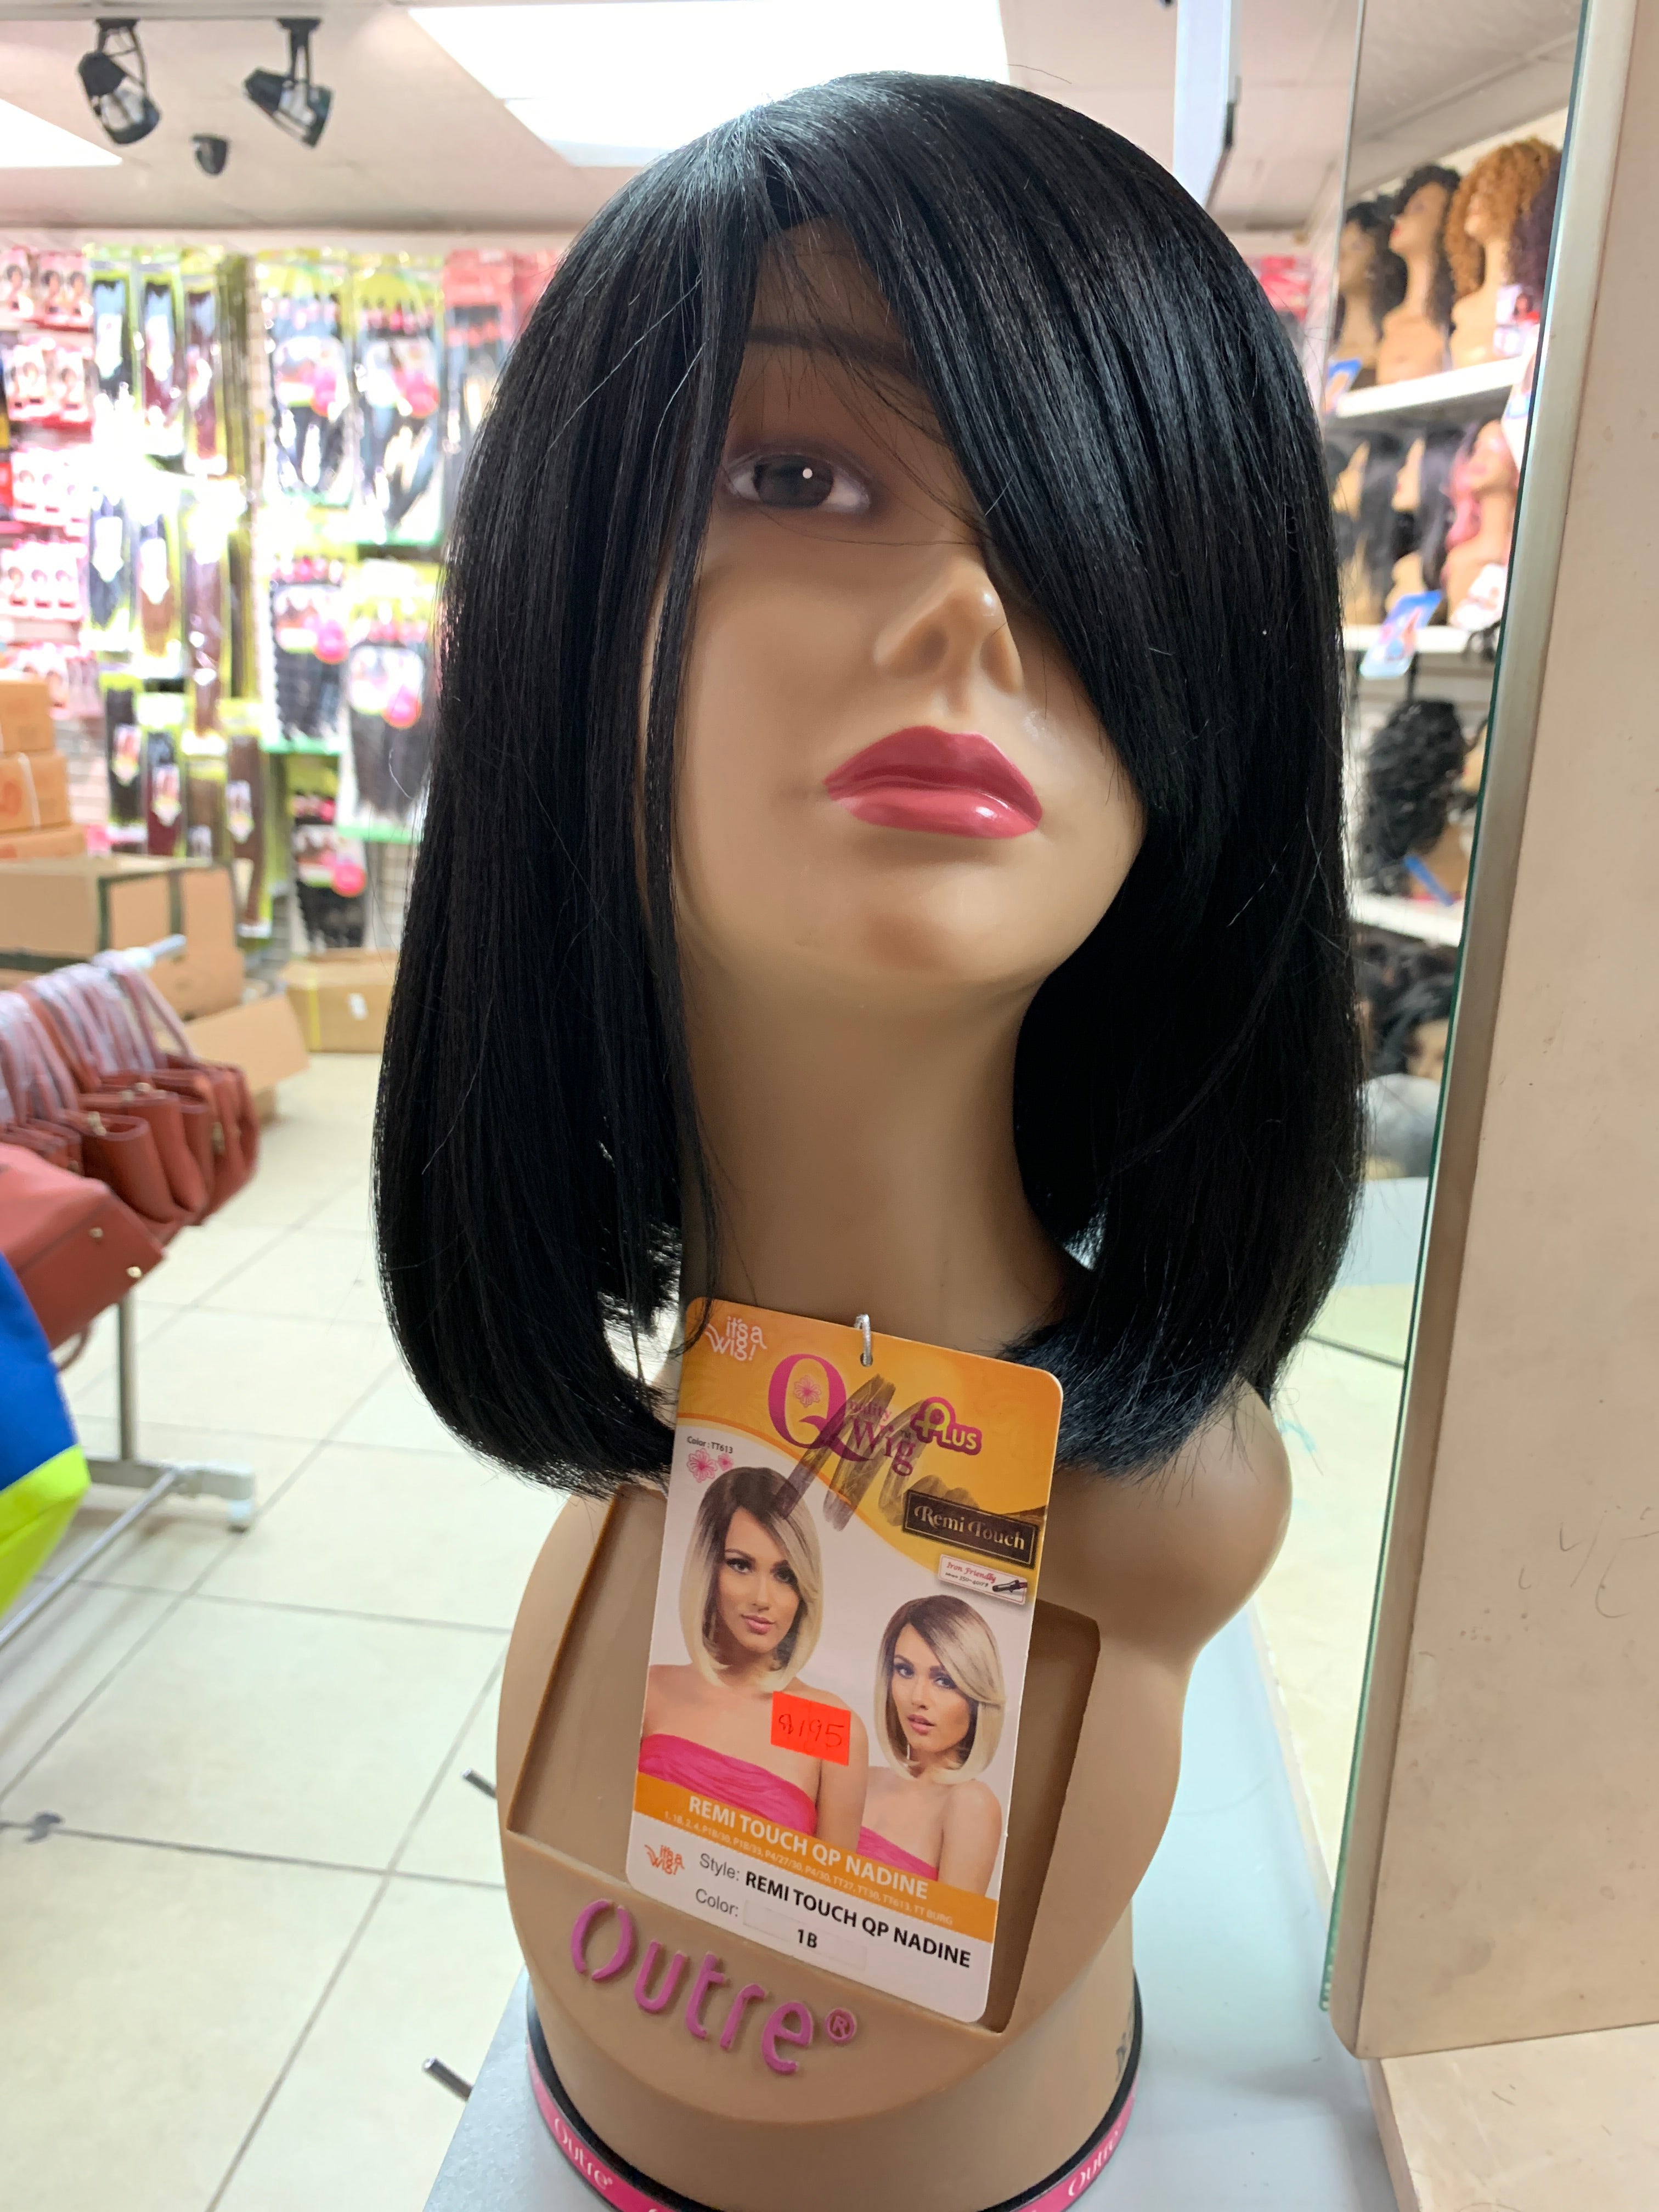 It’s a wig remi touch qp nadine